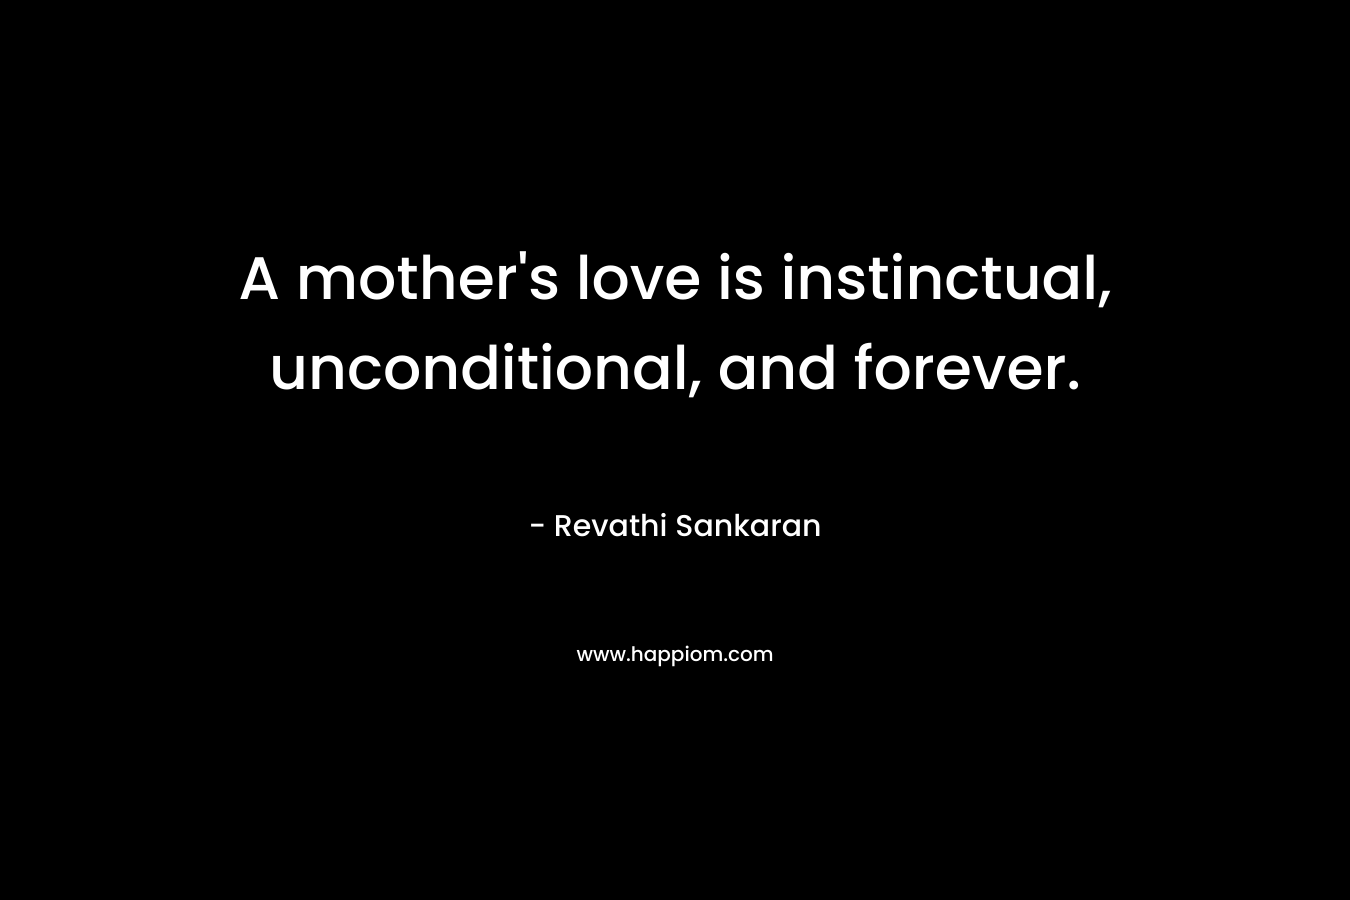 A mother's love is instinctual, unconditional, and forever.